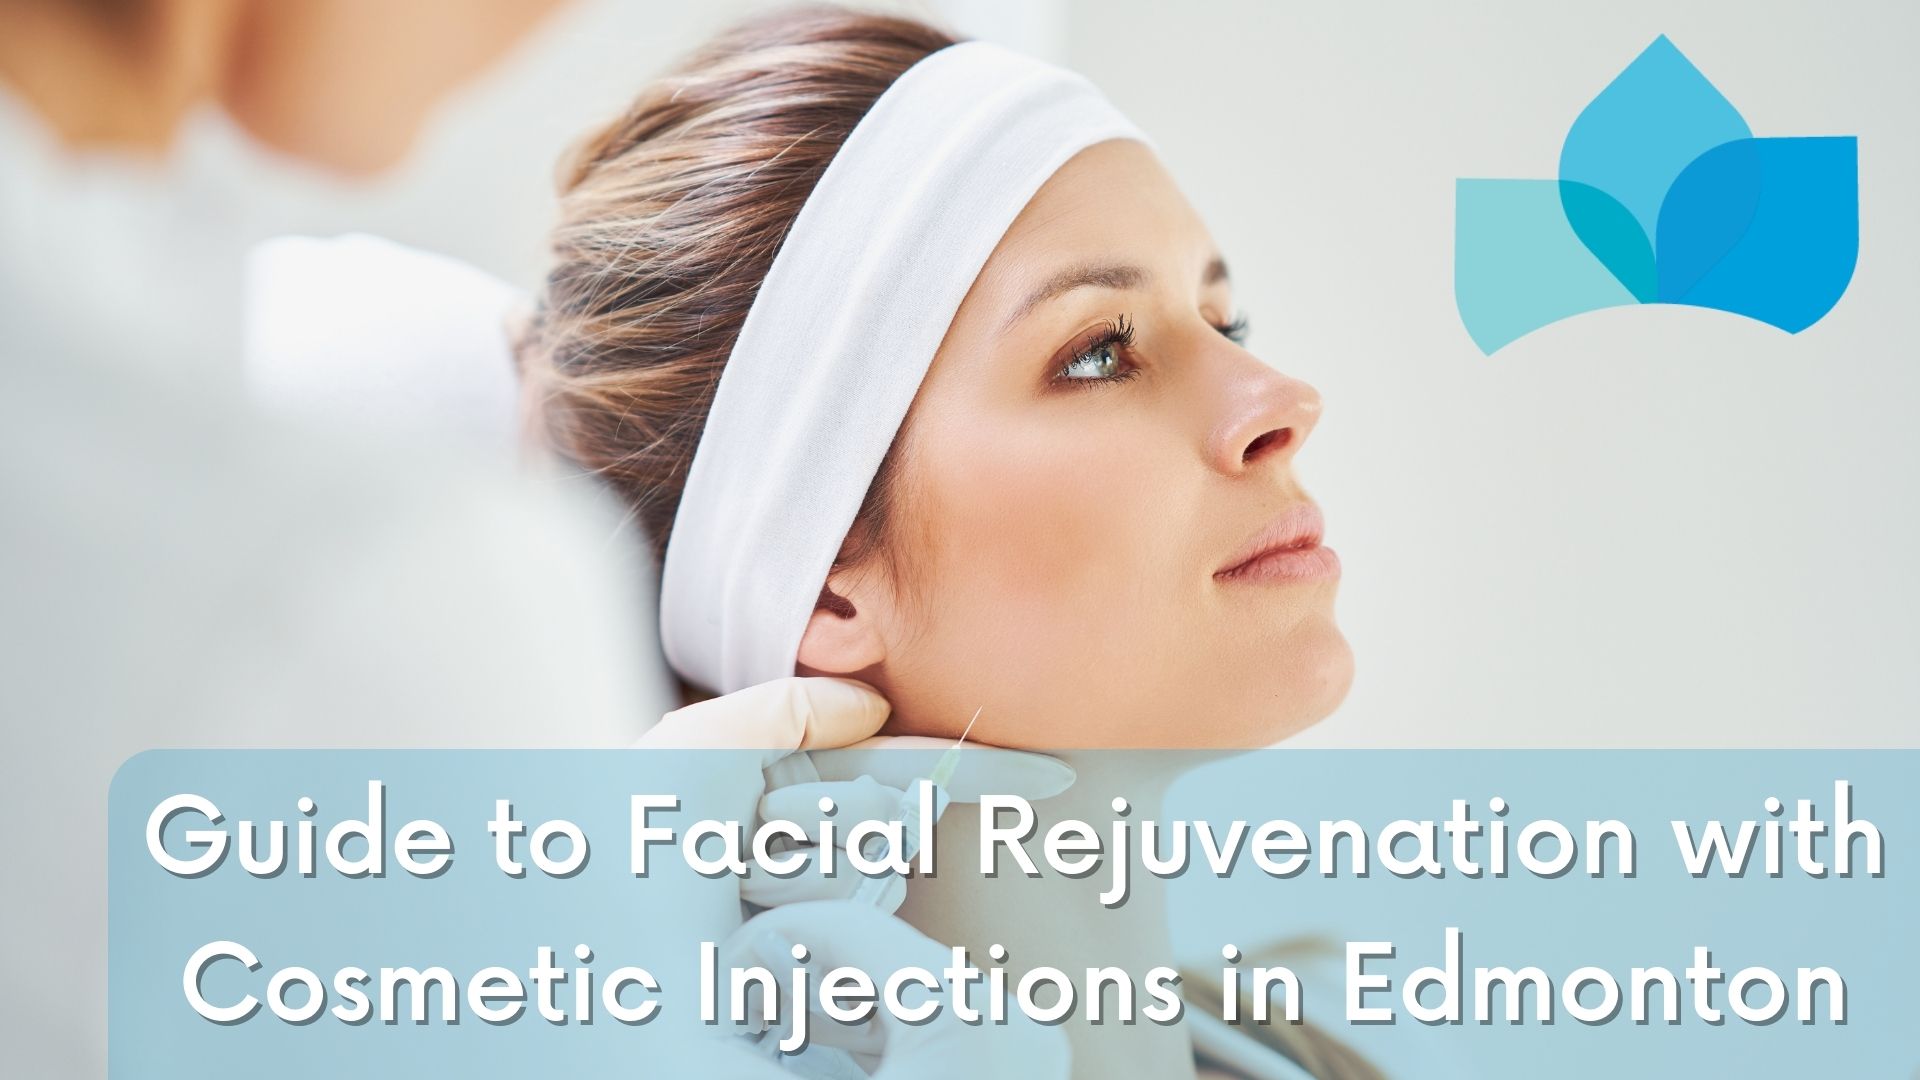 Guide to Facial Rejuvenation with Cosmetic Injections in Edmonton